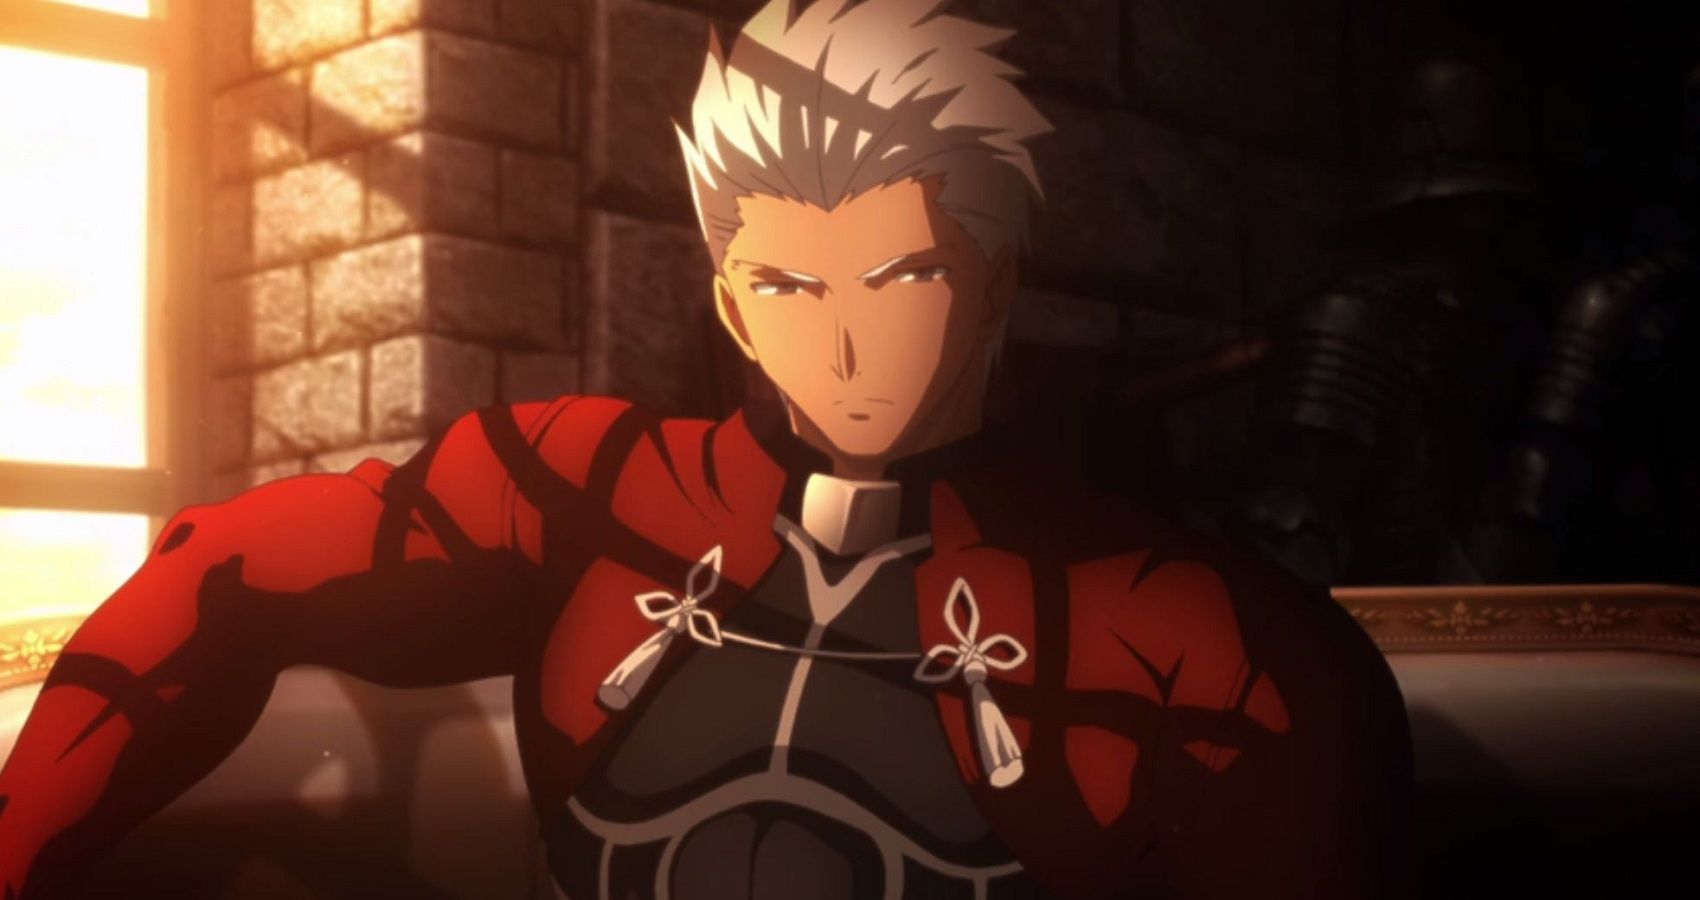 Fate/Stay Night: Servants, Ranked According To Power